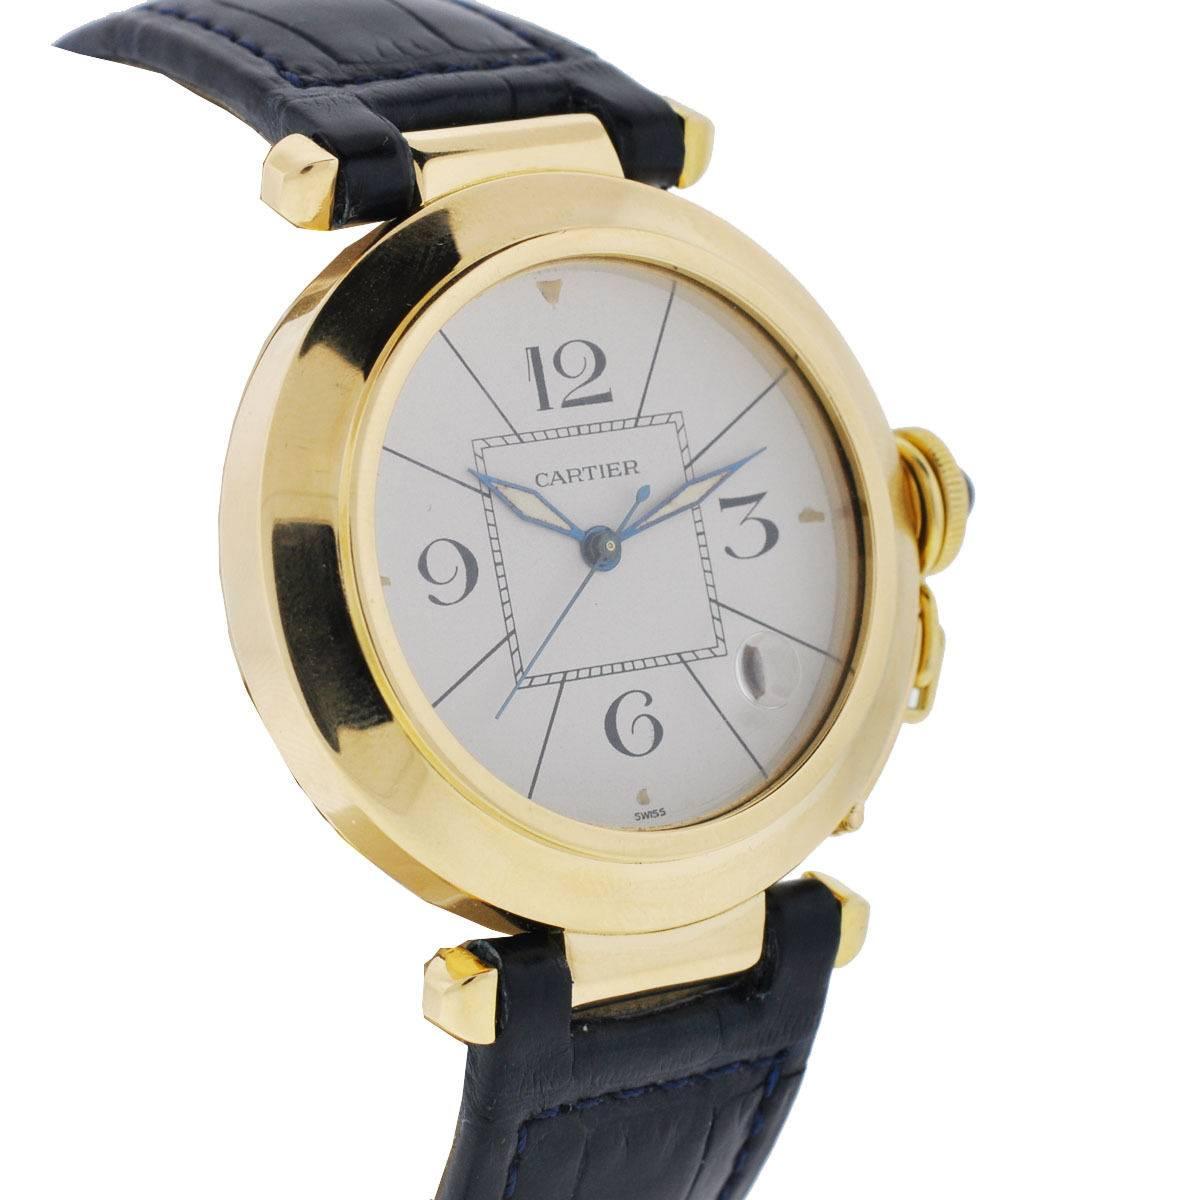 Company - Pasha
Model - Pasha
Case Metal - 18k Yellow Gold
Case Size - 38mm
Dial - White
Bezel - 18k Yellow Gold
Bracelet - Blue Leather, Shows cracks and wear on the band 
Crystal - Scratch Resistant Sapphire
Movement - Automatic
Features - Hours,